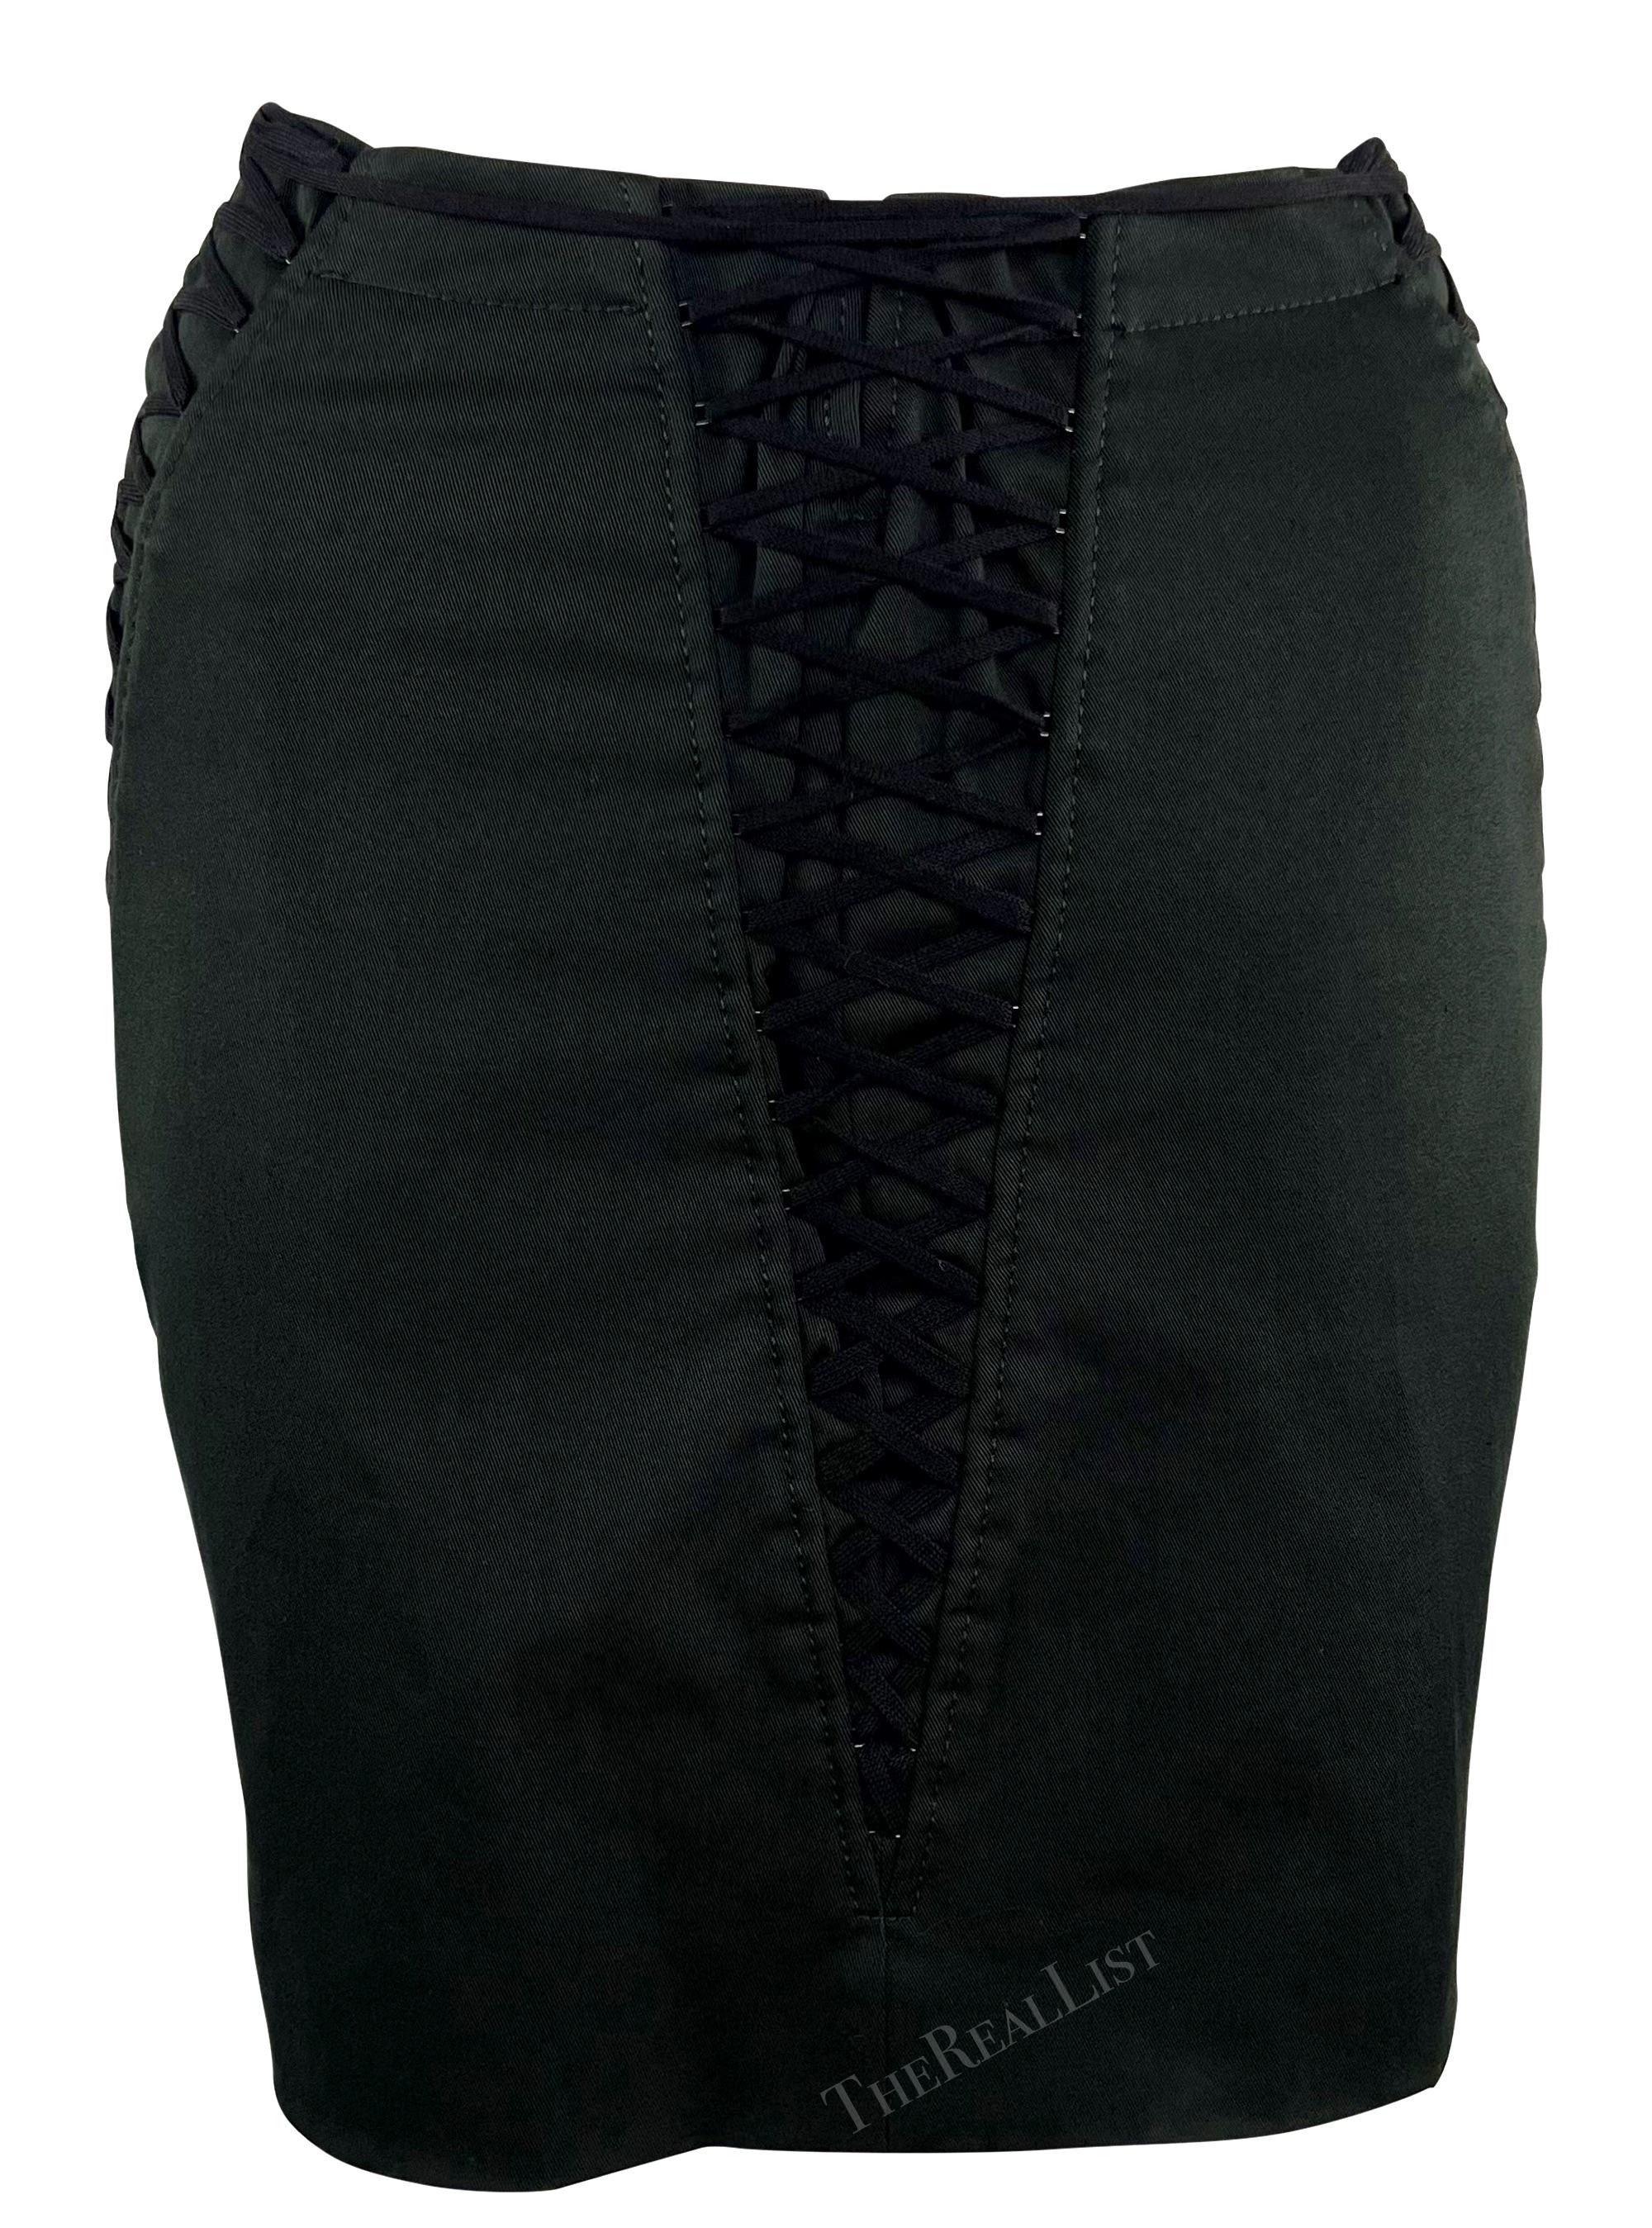 S/S 2002 Dolce & Gabbana Black Lace Up Corset-Style Mini Skirt In Excellent Condition For Sale In West Hollywood, CA